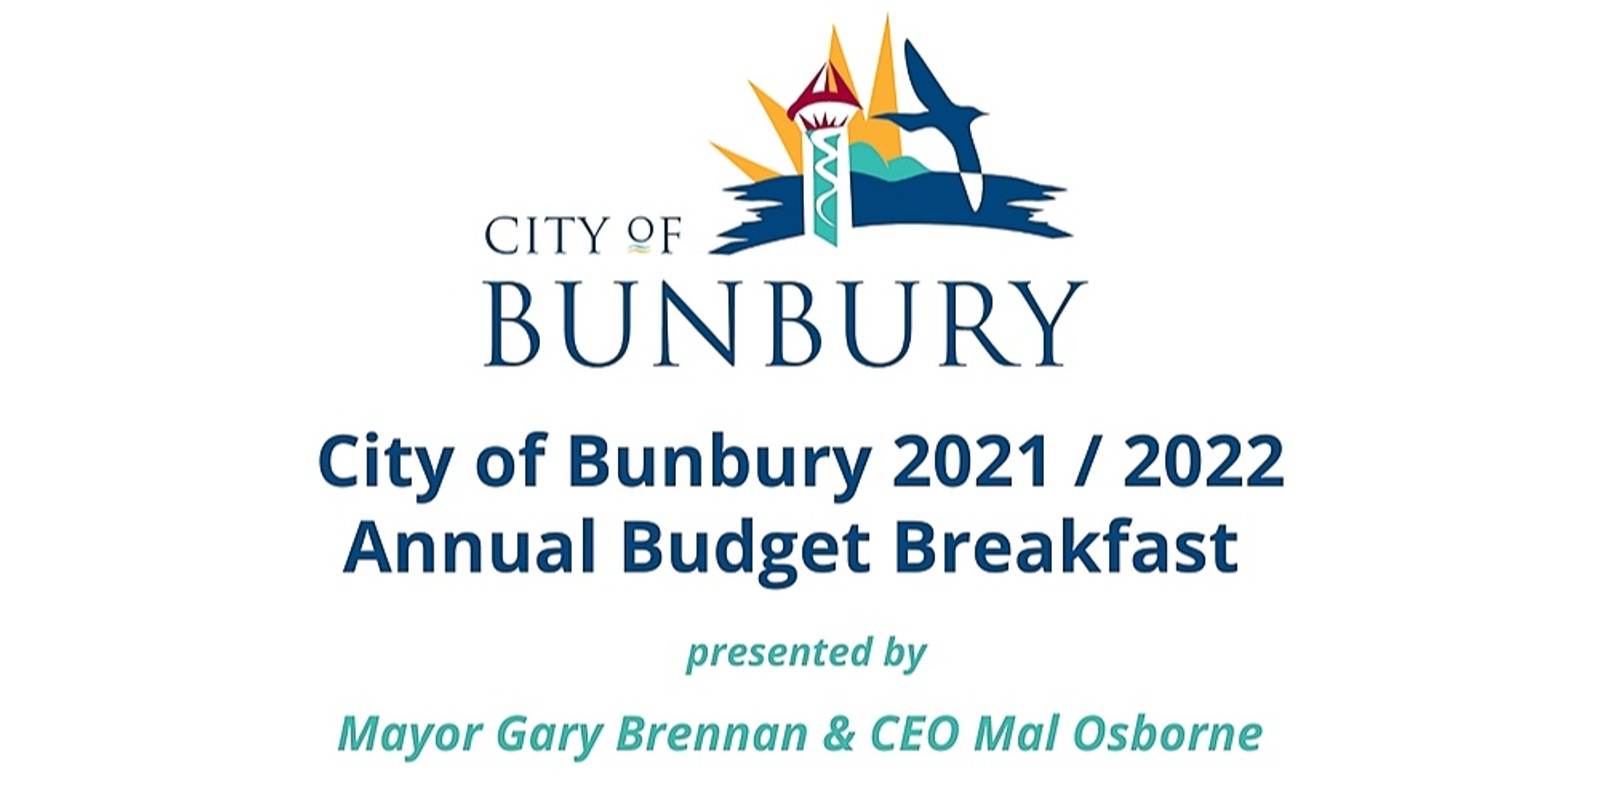 Banner image for City of Bunbury 2021/2022 Annual Budget Breakfast